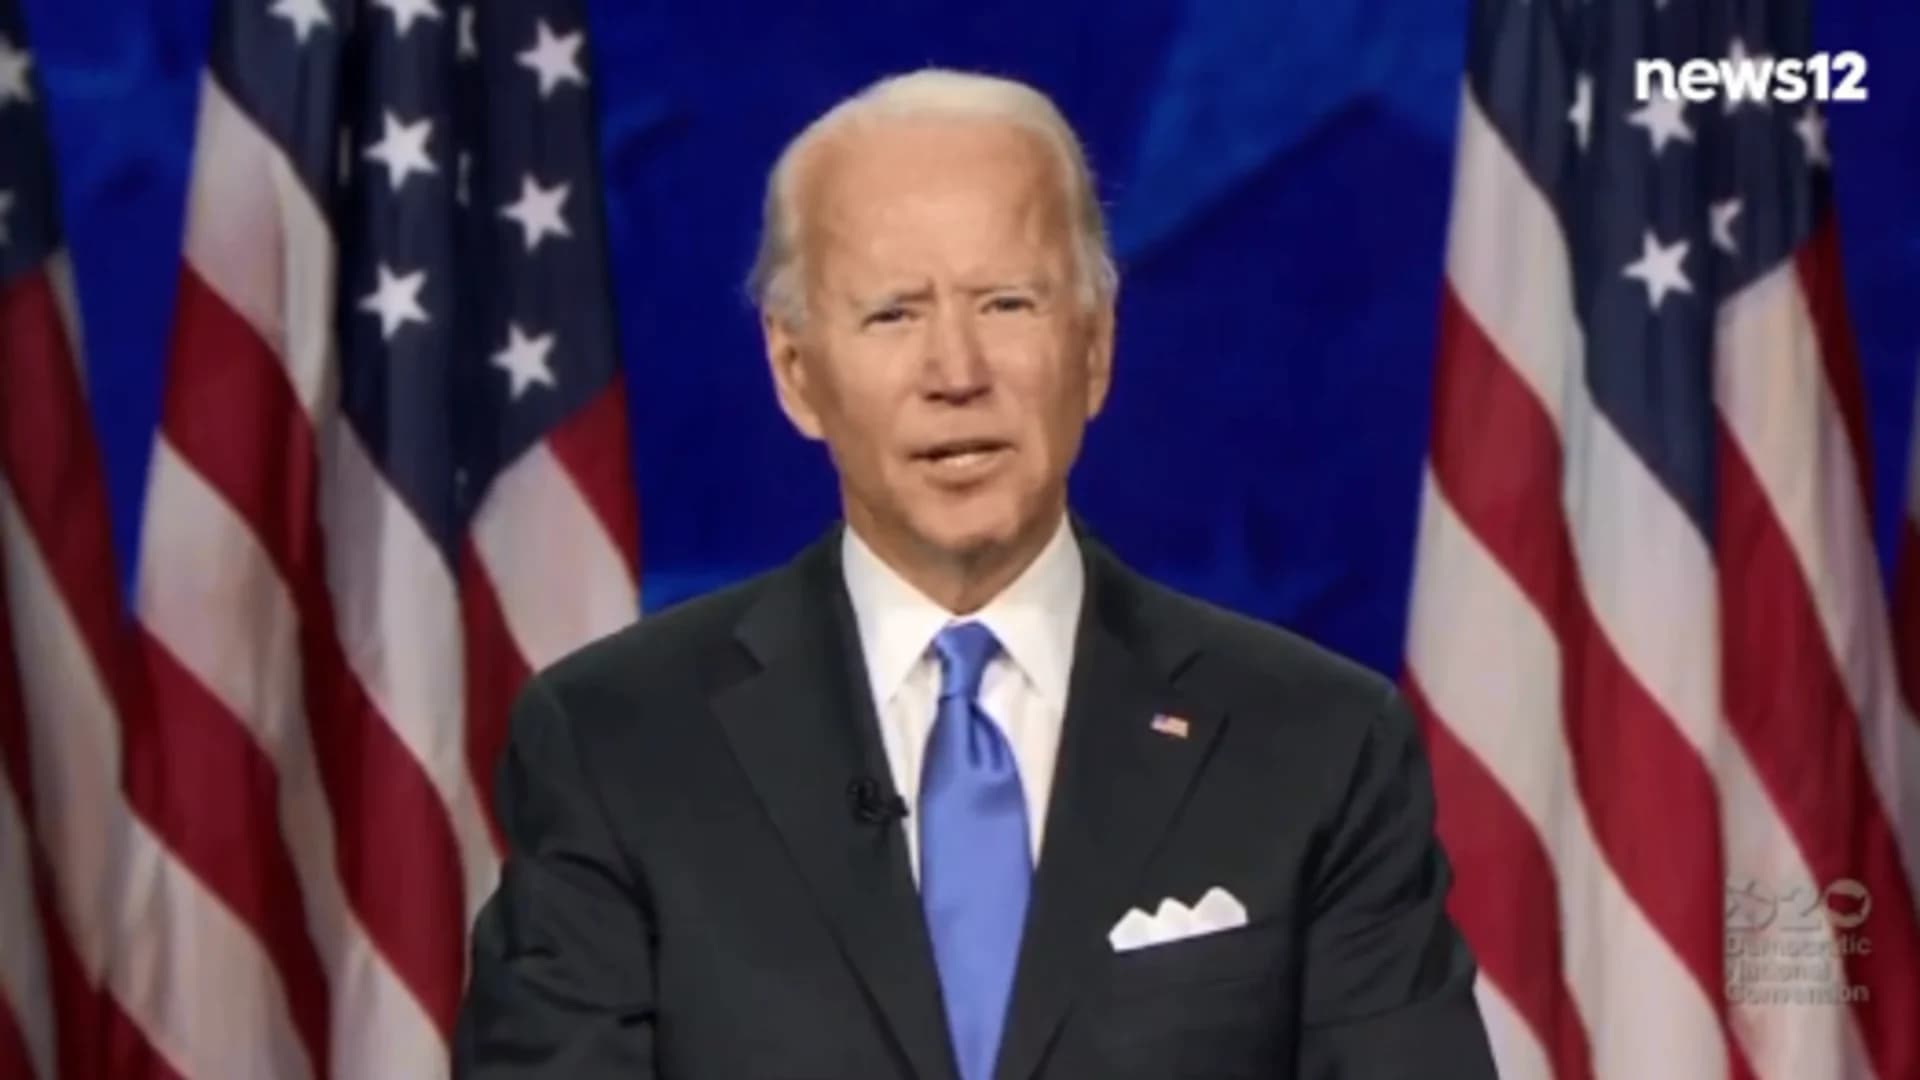 Biden vows to unite an America mired in crises